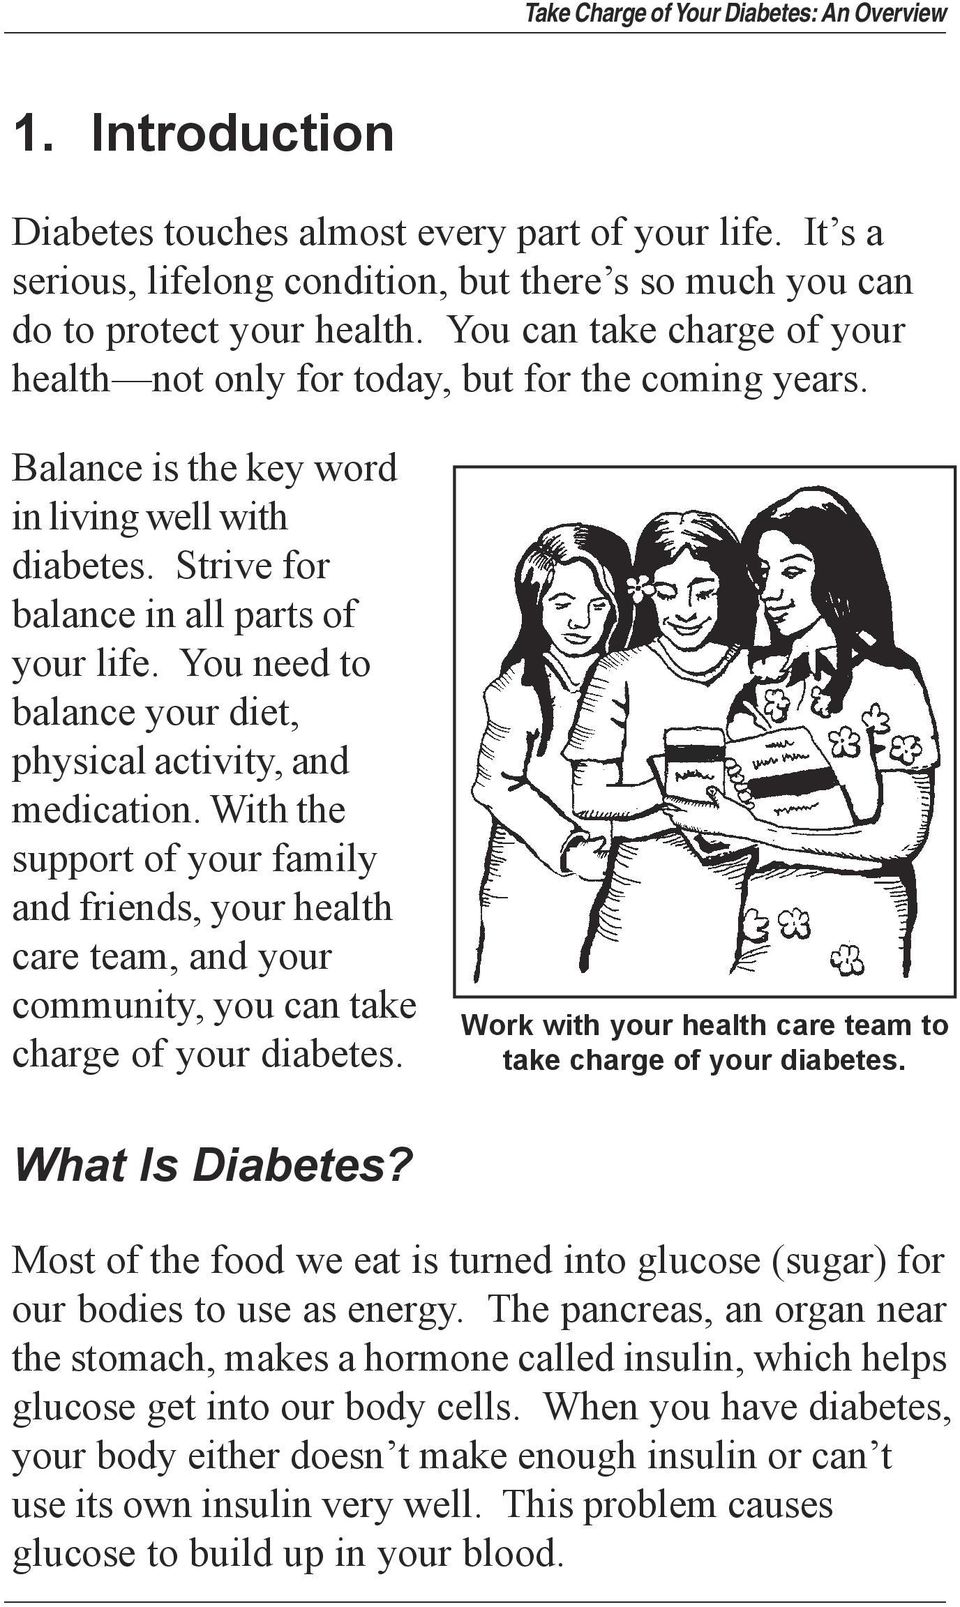 You need to balance your diet, physical activity, and medication. With the support of your family and friends, your health care team, and your community, you can take charge of your diabetes.